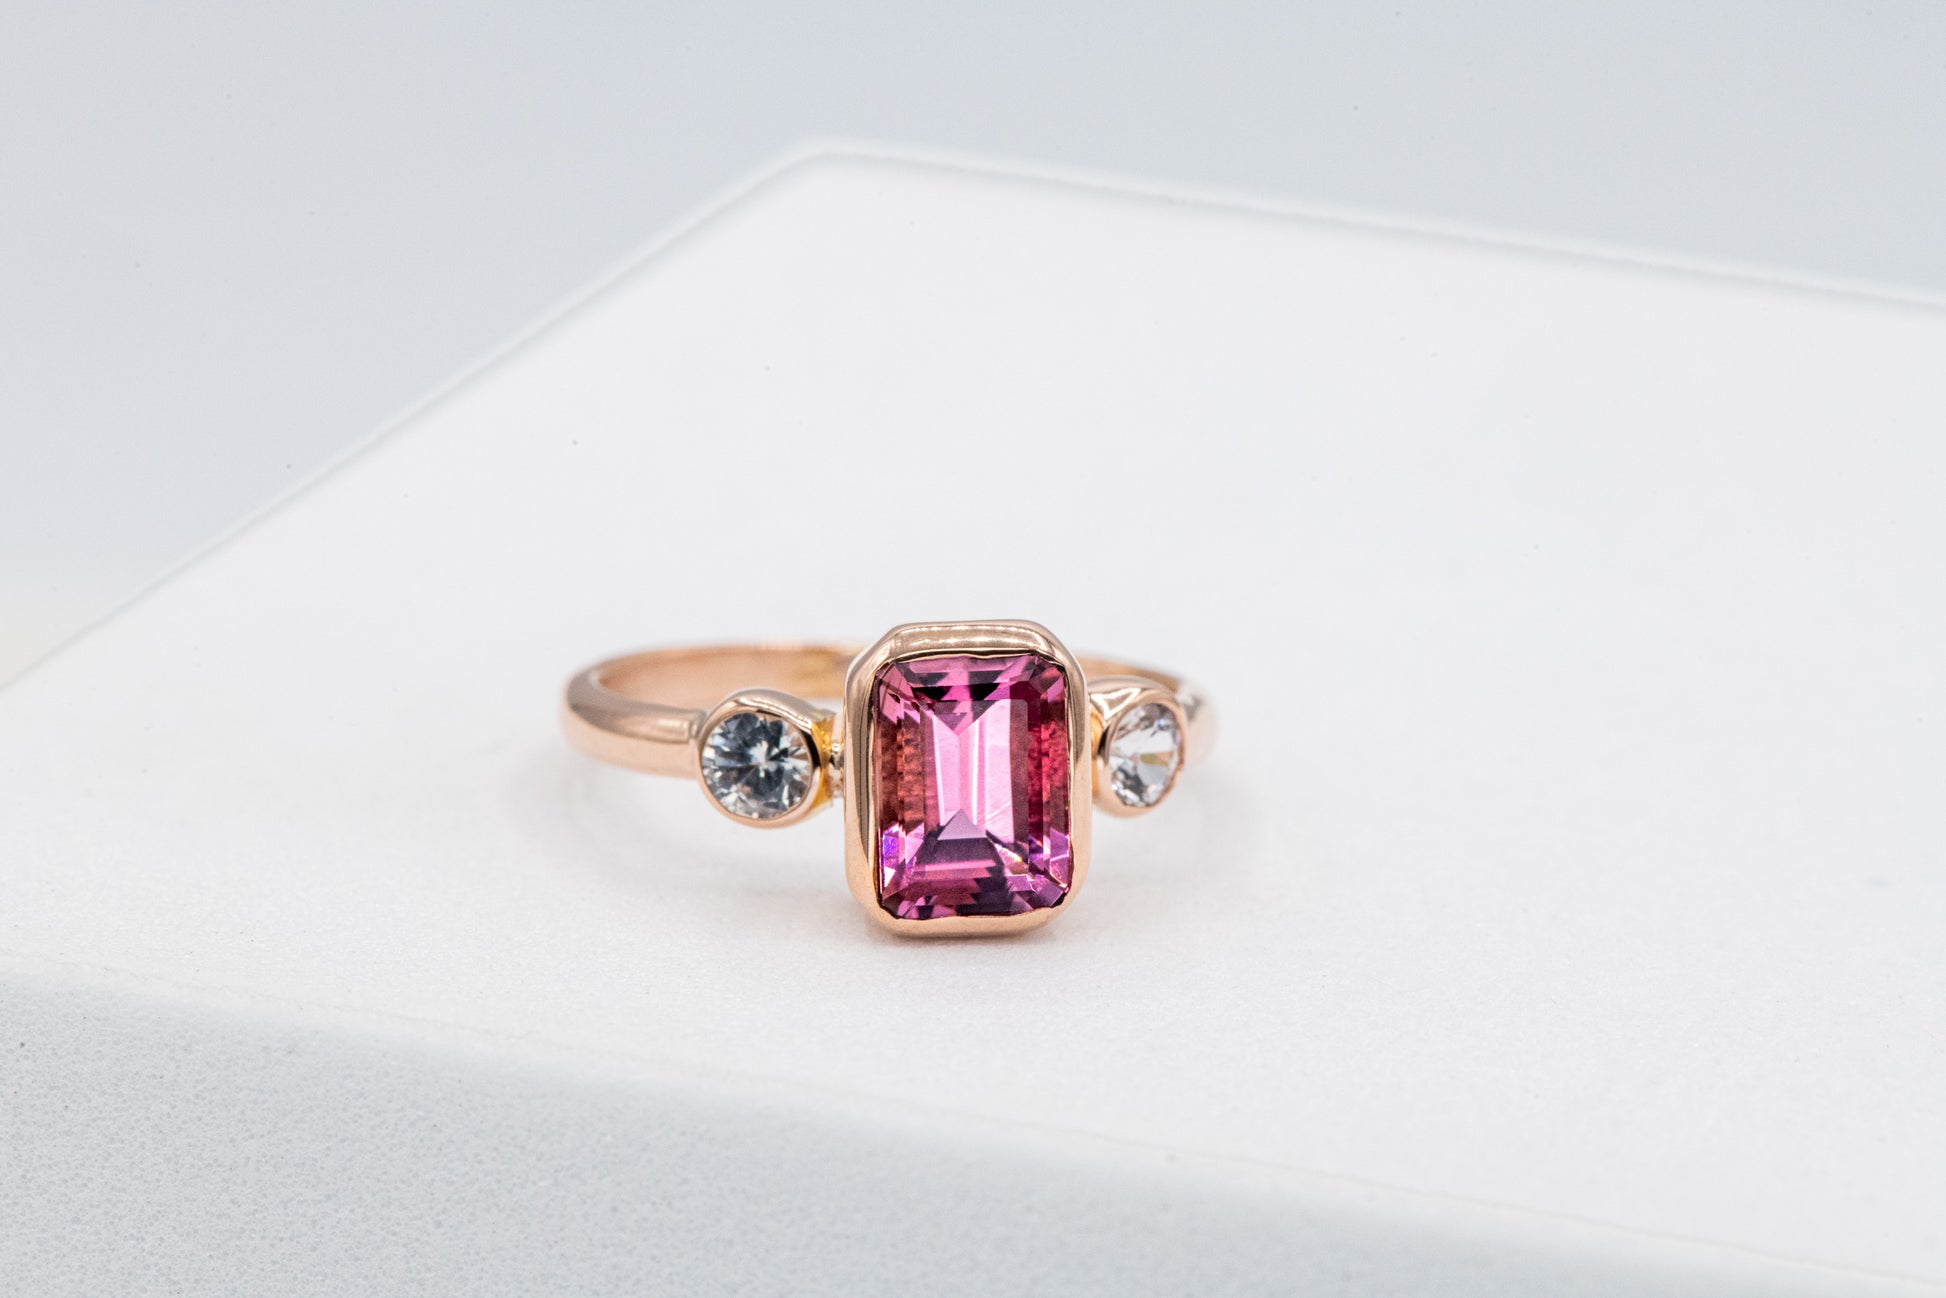 Cassin Jewelry presents a exquisite handmade Pink Tourmaline and White Sapphire ring.